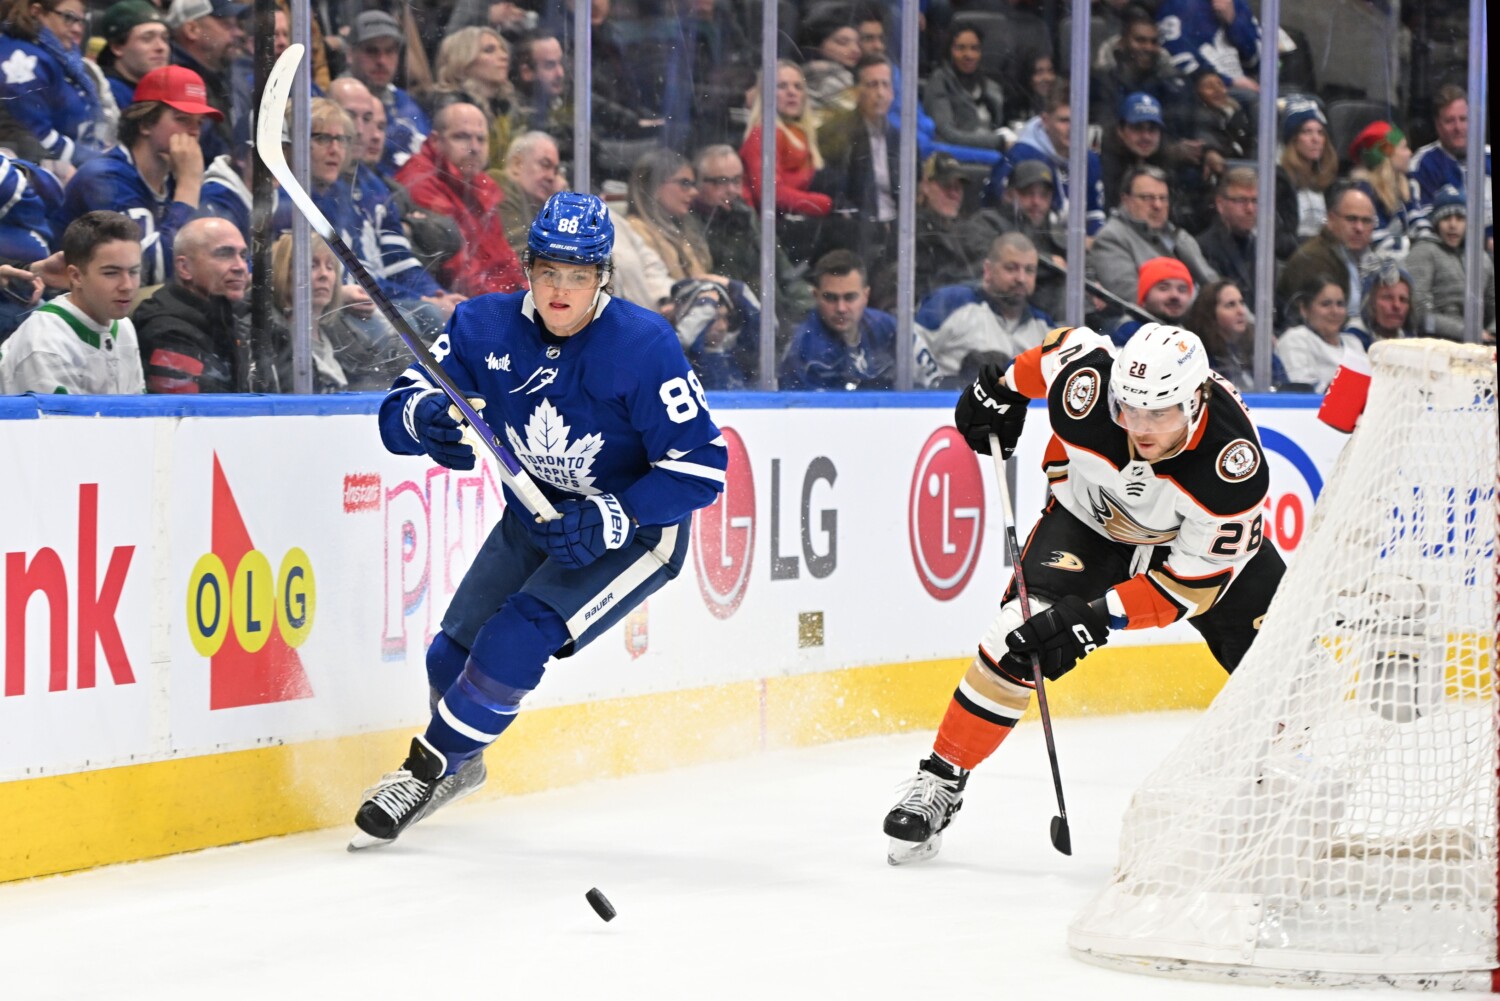 Looking to make the leap: William Nylander - NBC Sports